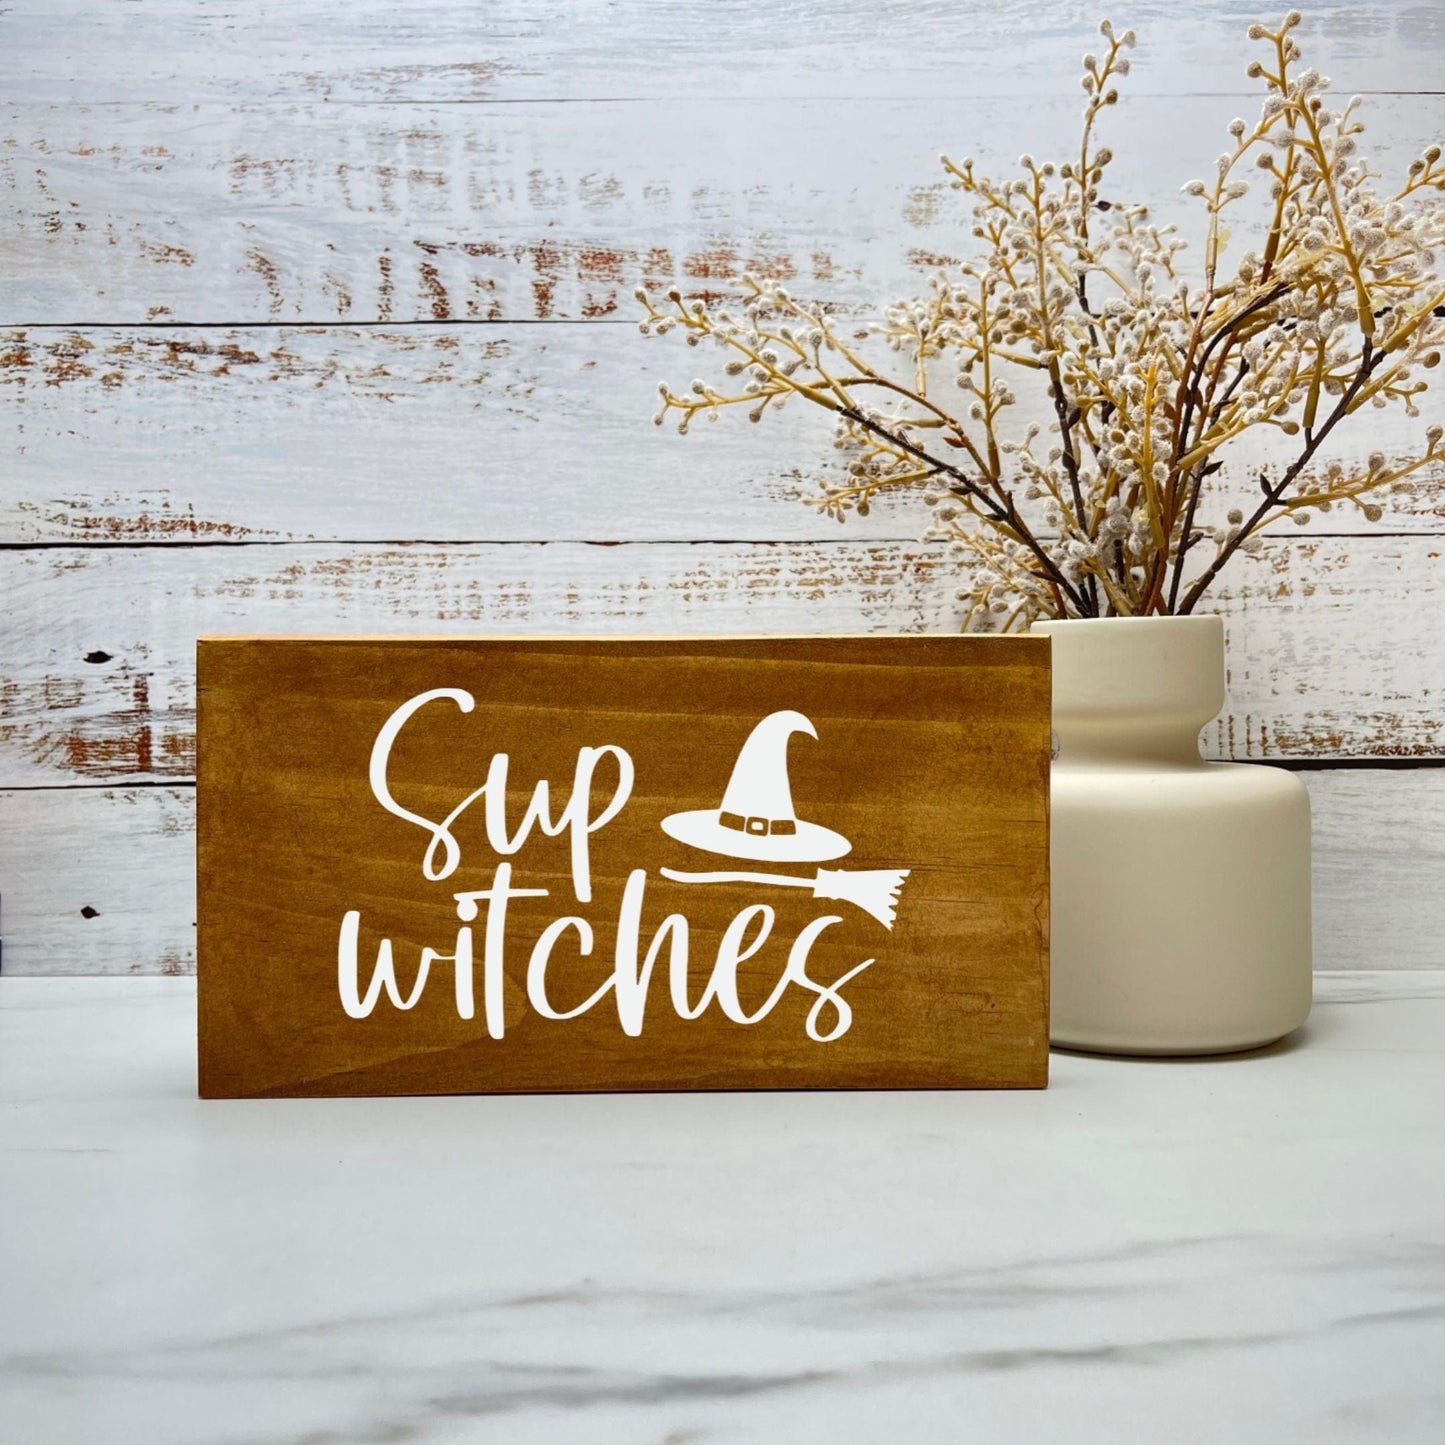 Sup witches Sign, Halloween Wood Sign, Halloween Home Decor, Spooky Decor